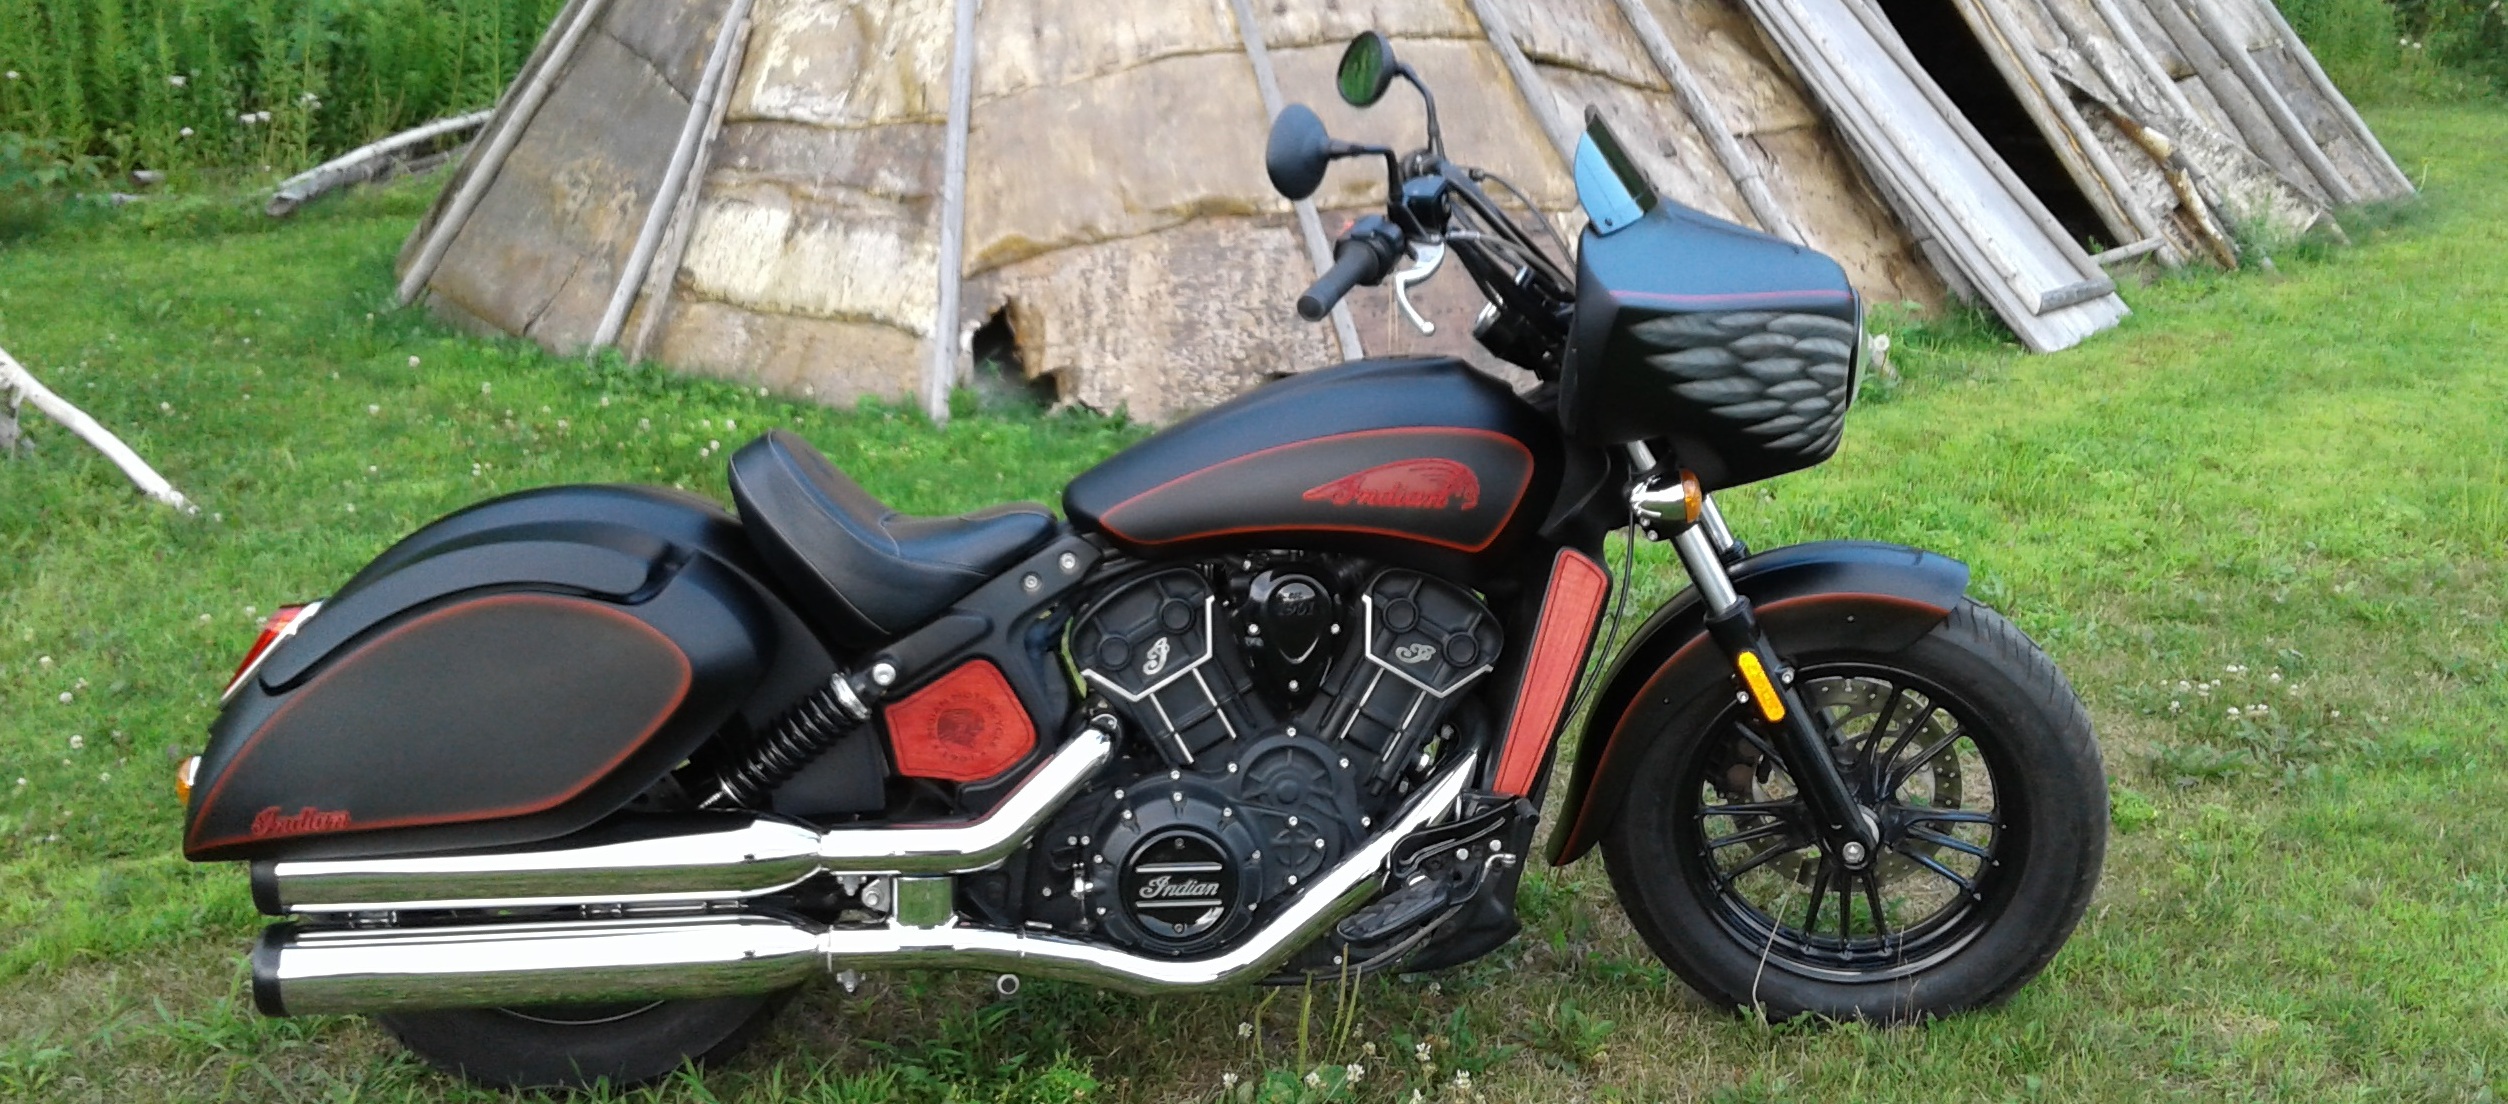 INDIAN SCOUT & SIXTY FAIRING